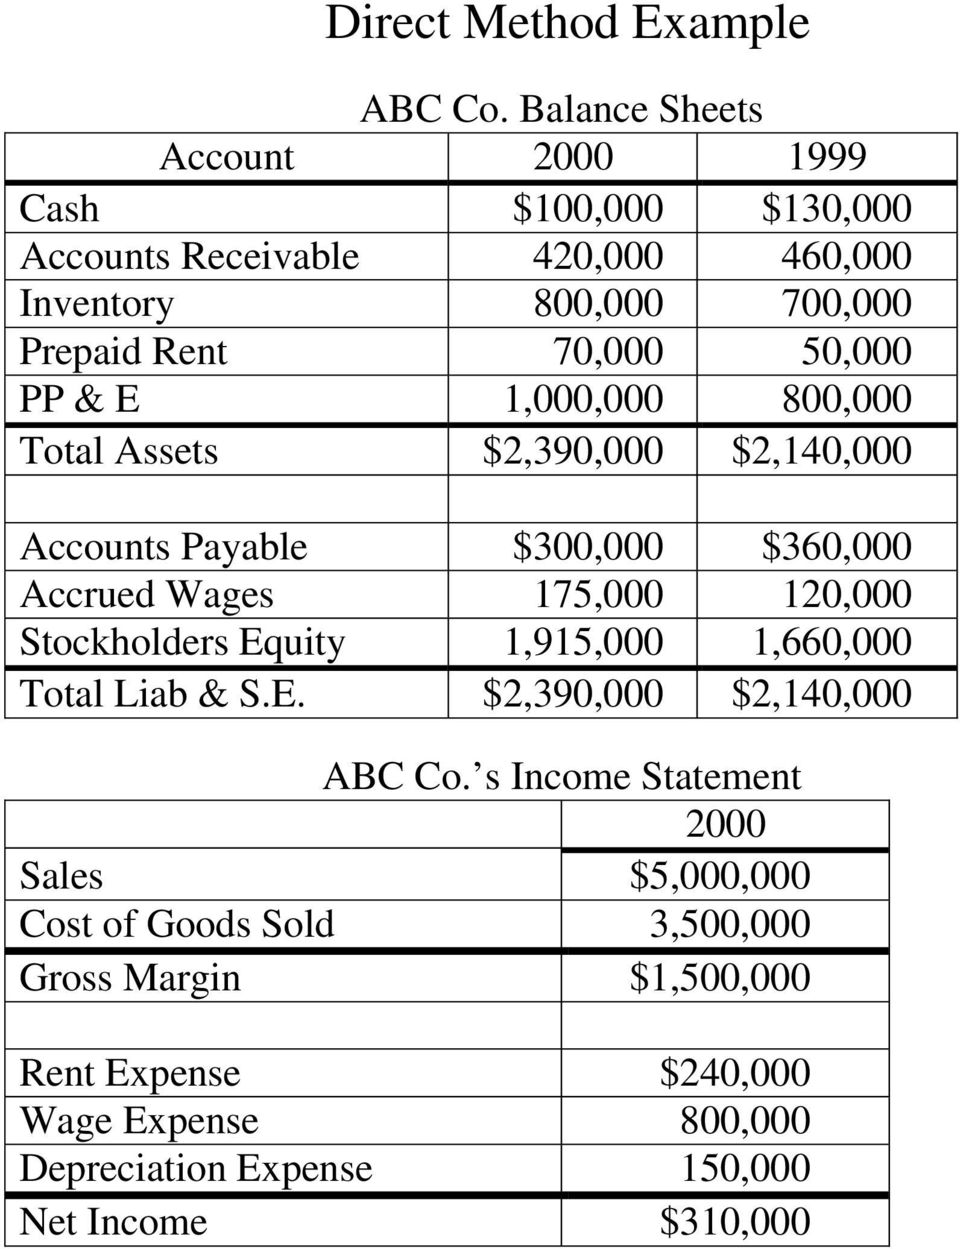 50,000 PP & E 1,000,000 800,000 Total Assets $2,390,000 $2,140,000 Accounts Payable $300,000 $360,000 Accrued Wages 175,000 120,000